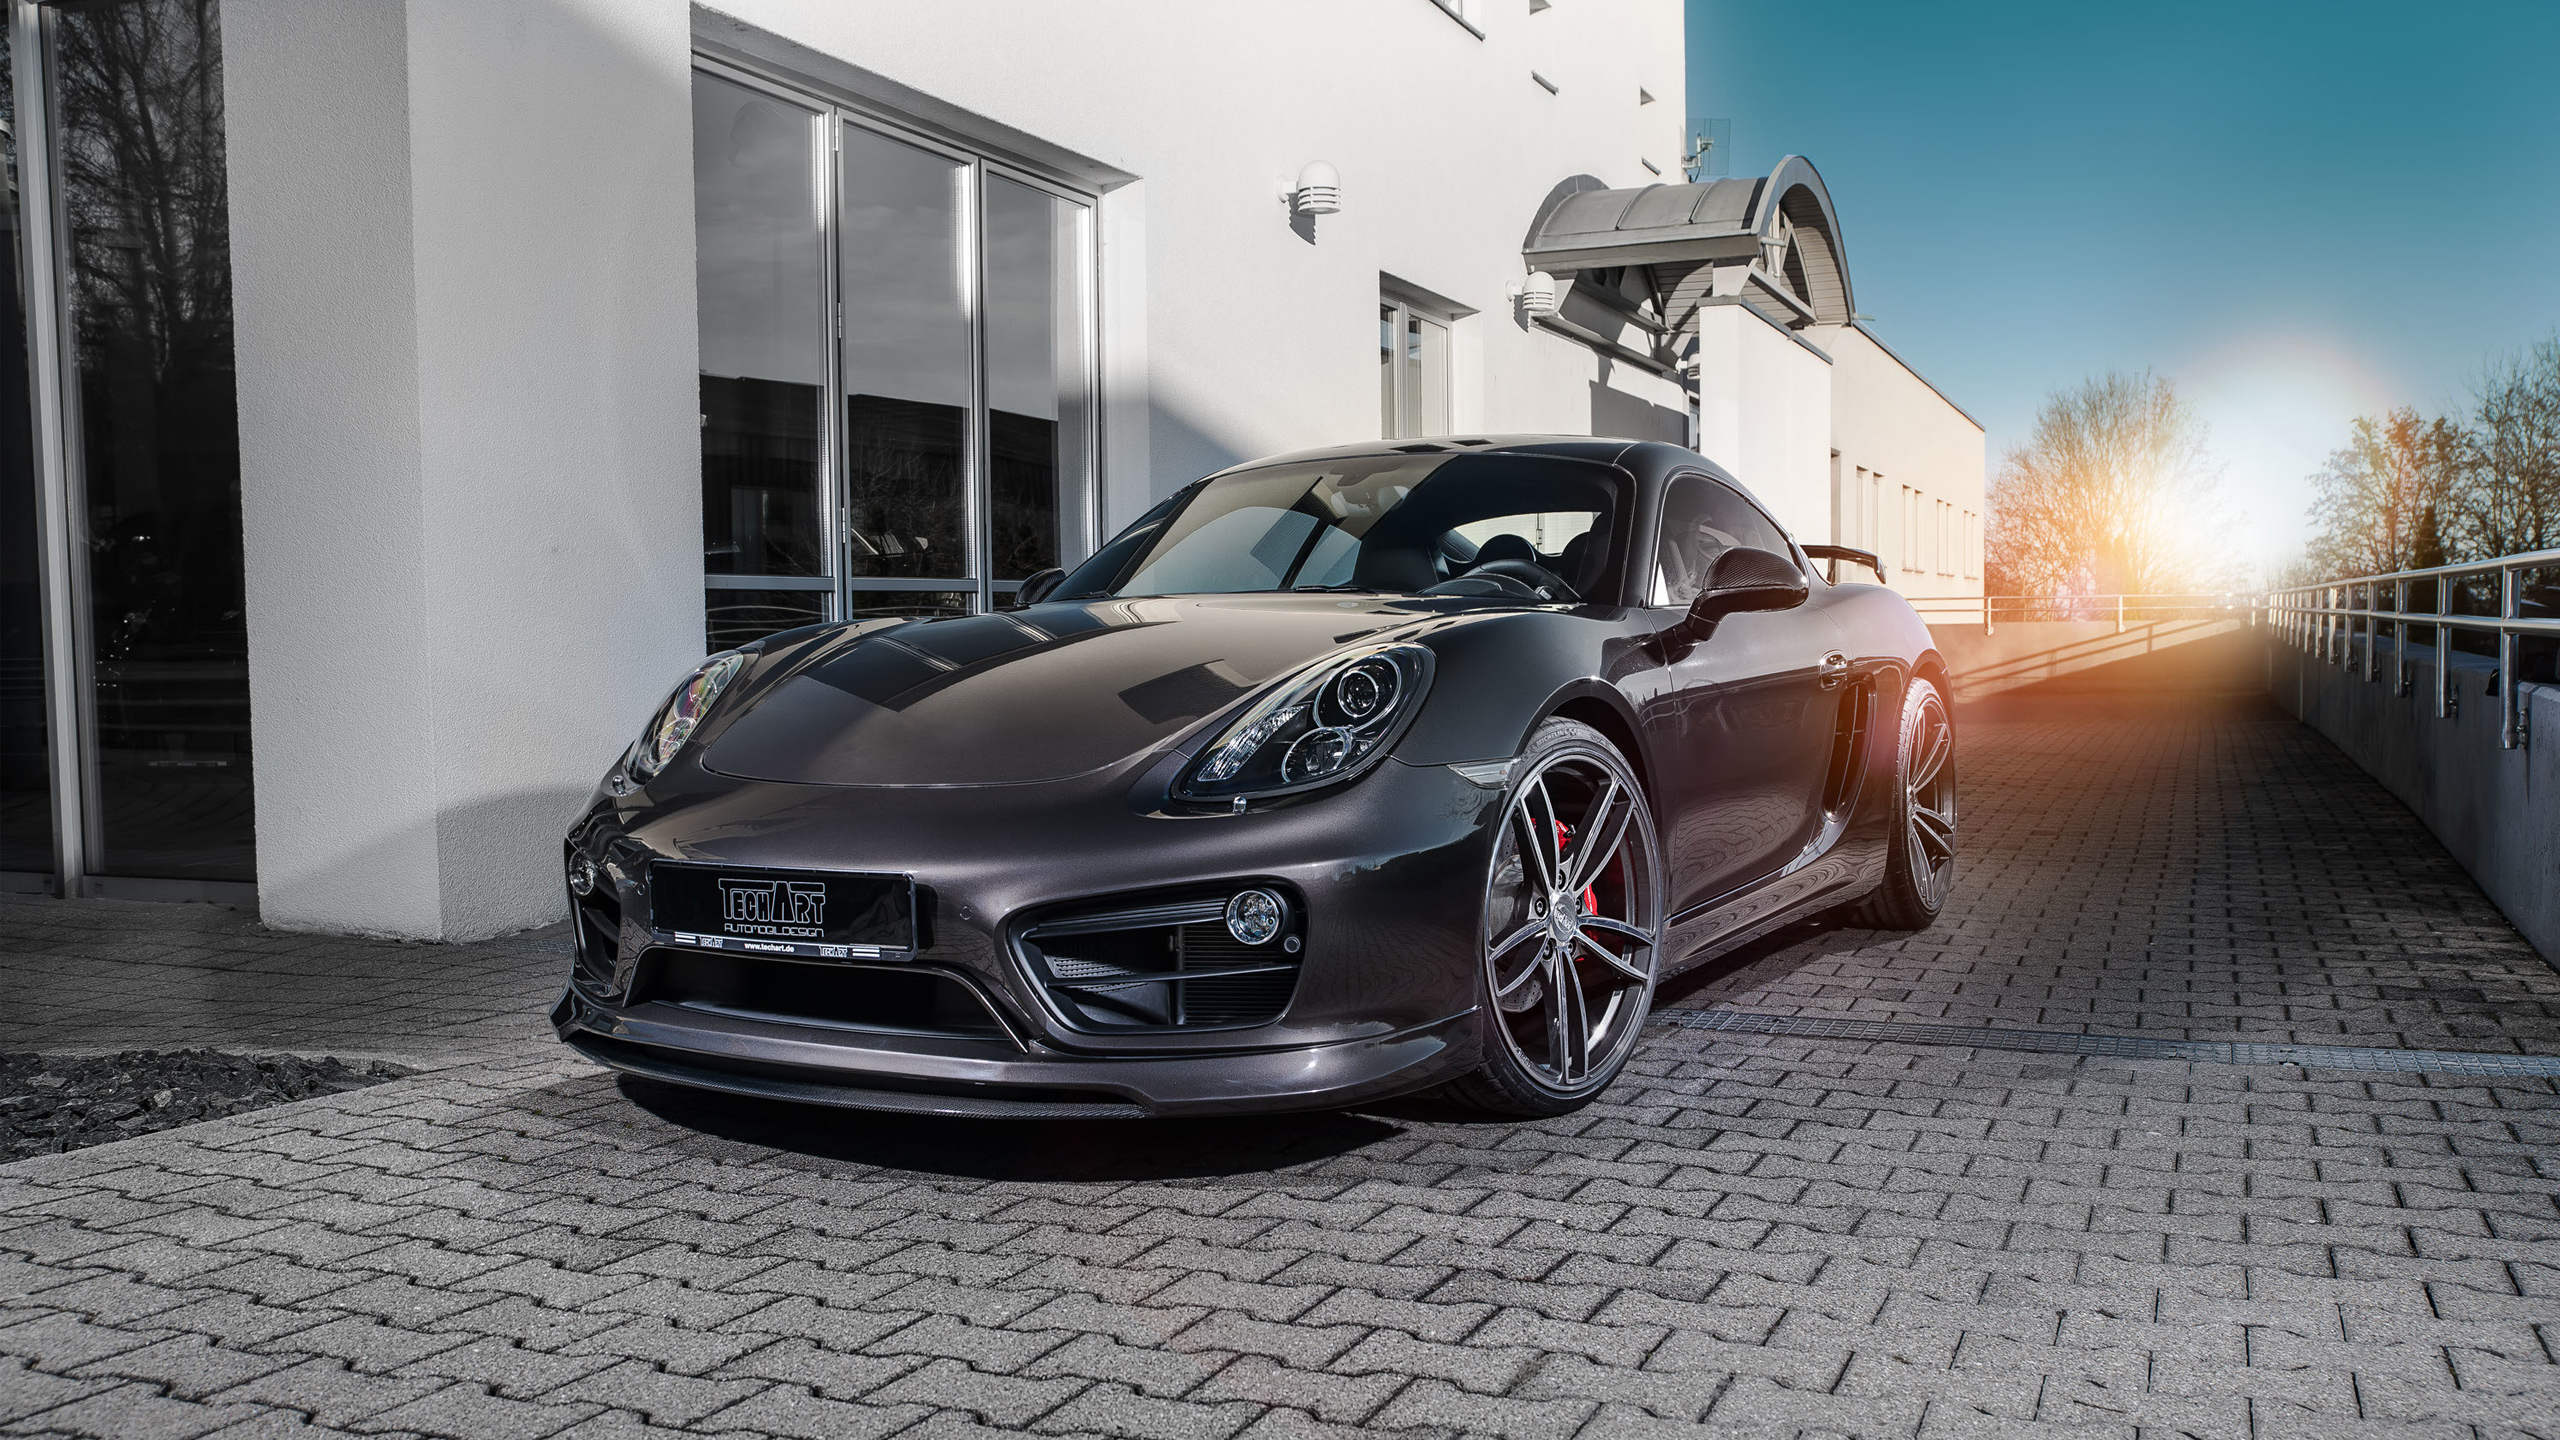 Porsche Cayman S Wallpapers and Background Images   stmednet